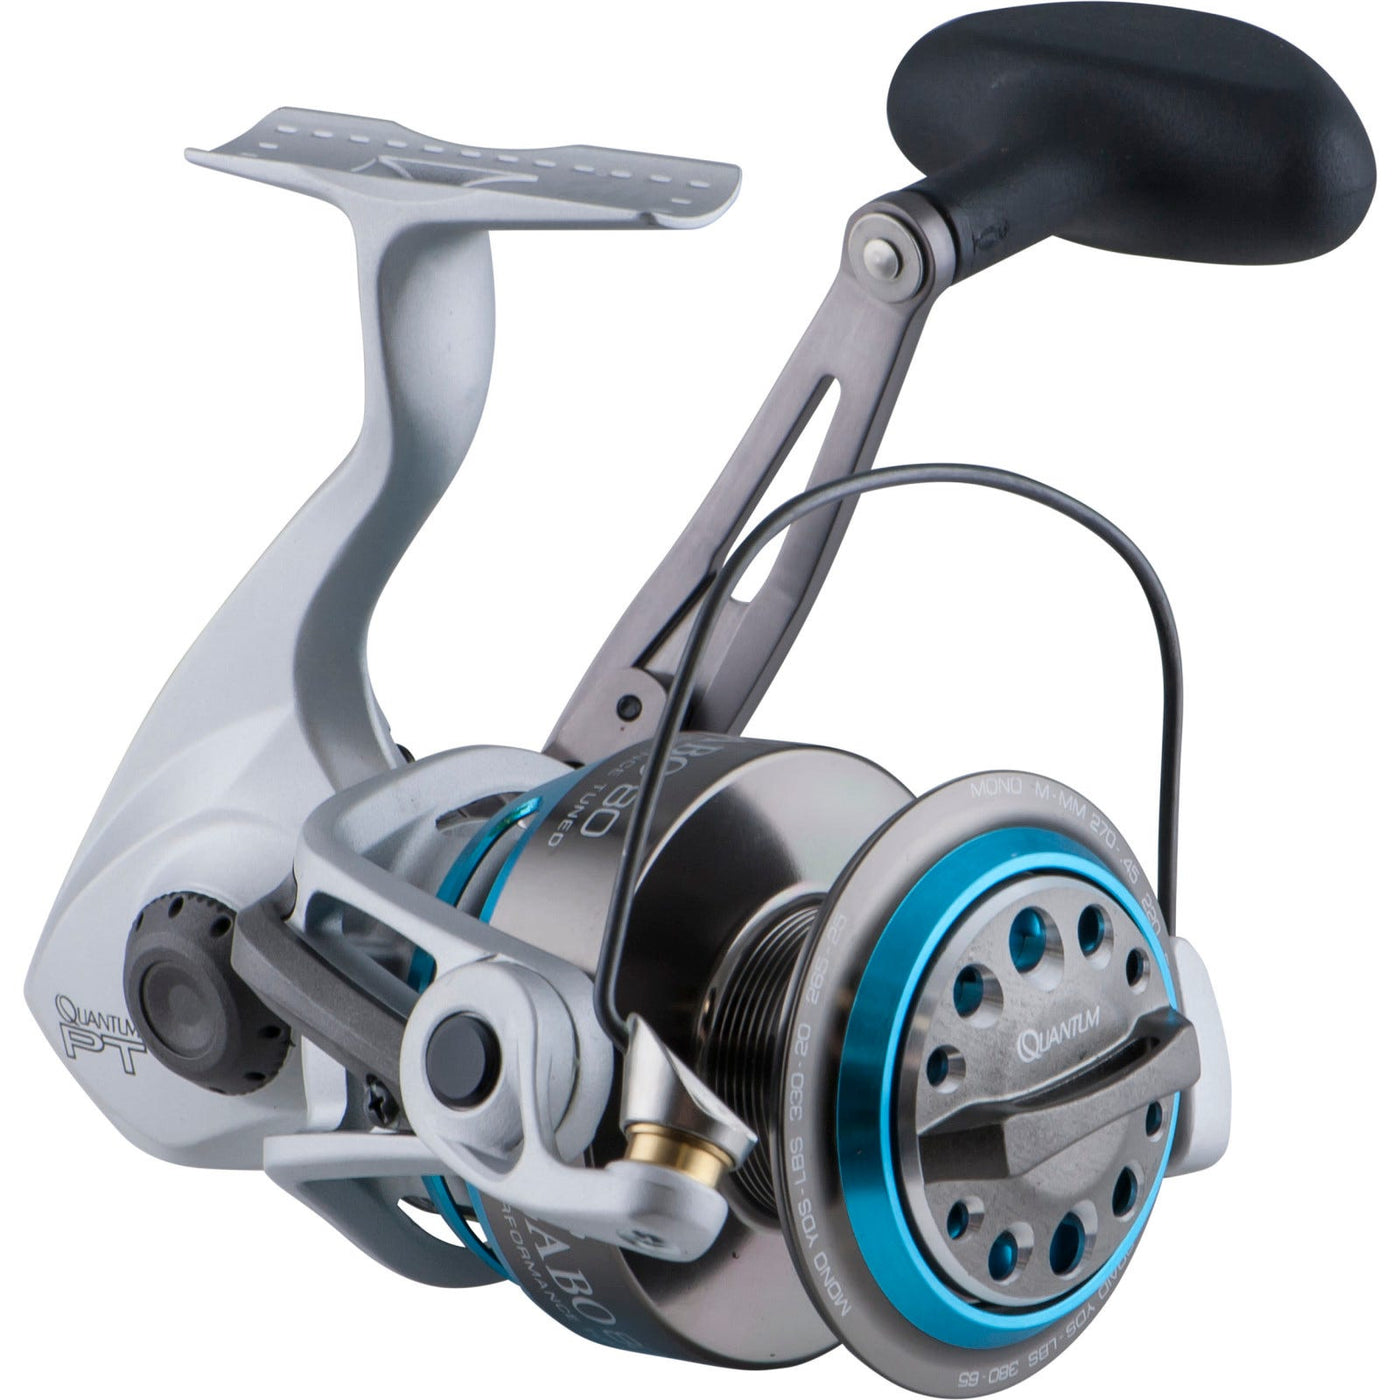 Quantum Cabo PTS 40 spin fishing reel how to take apart and service 